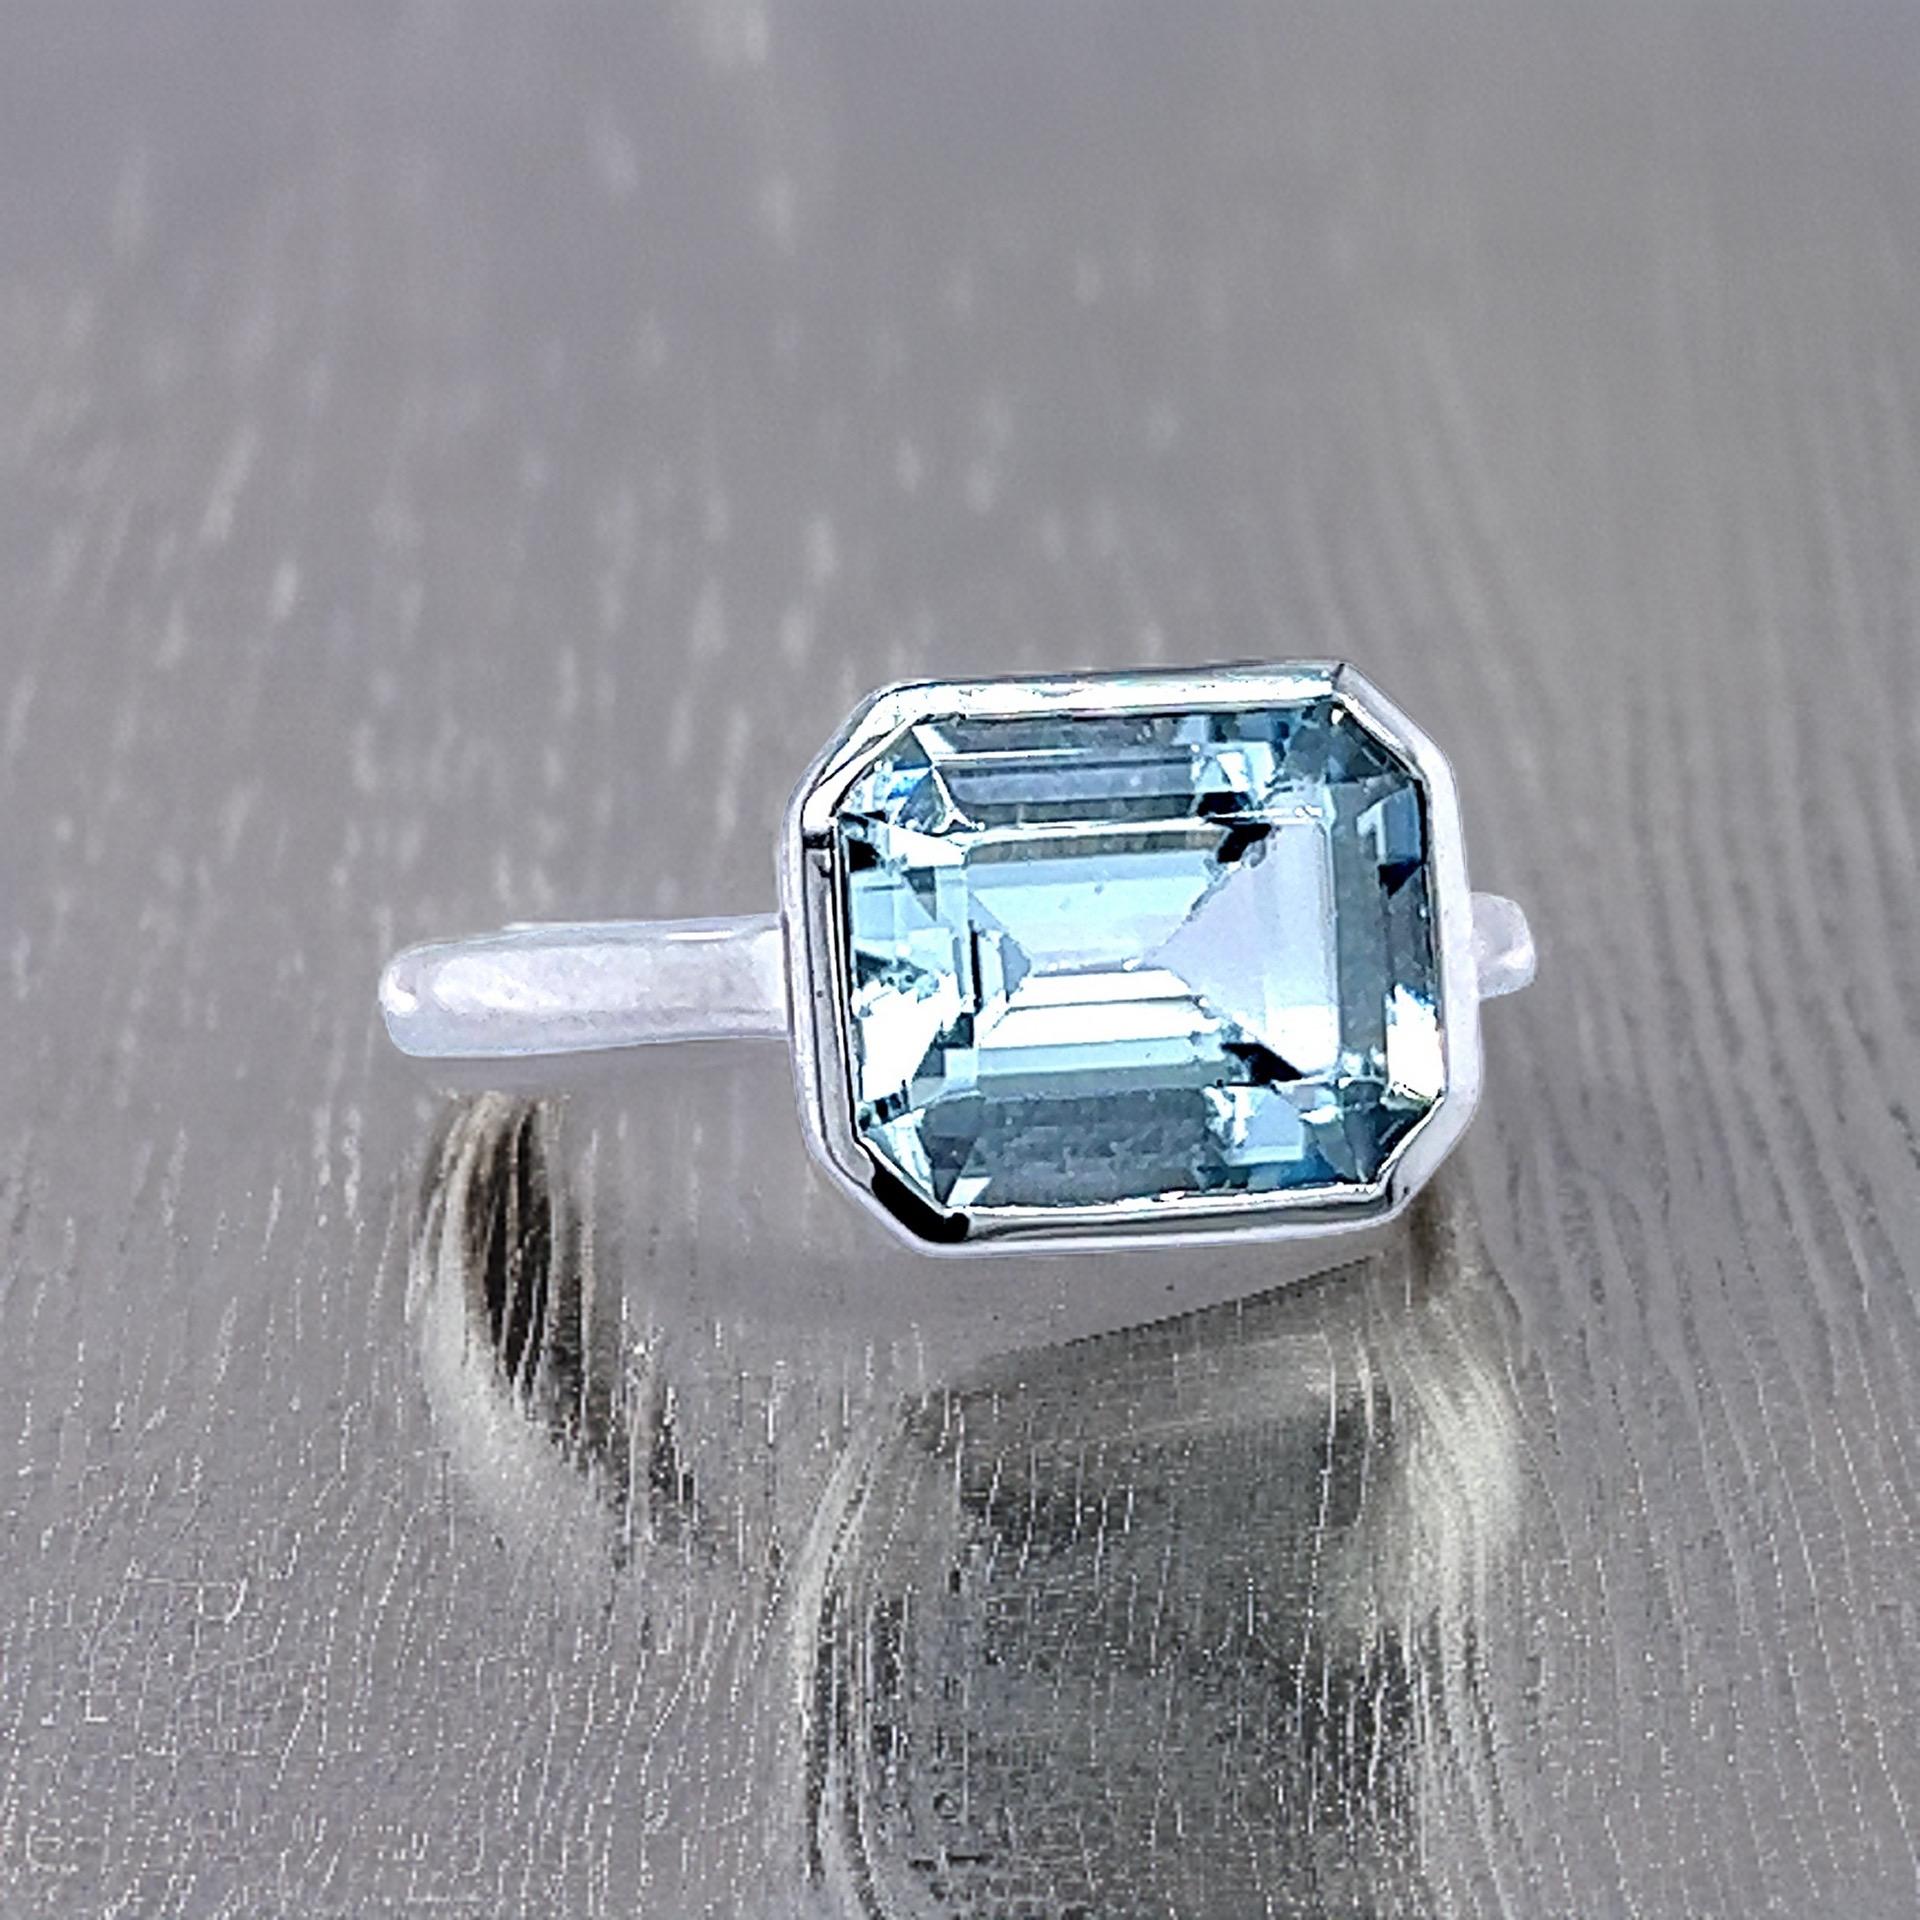 Natural Aquamarine Ring 6.5 14k White Gold 3.21 TCW Certified For Sale 1